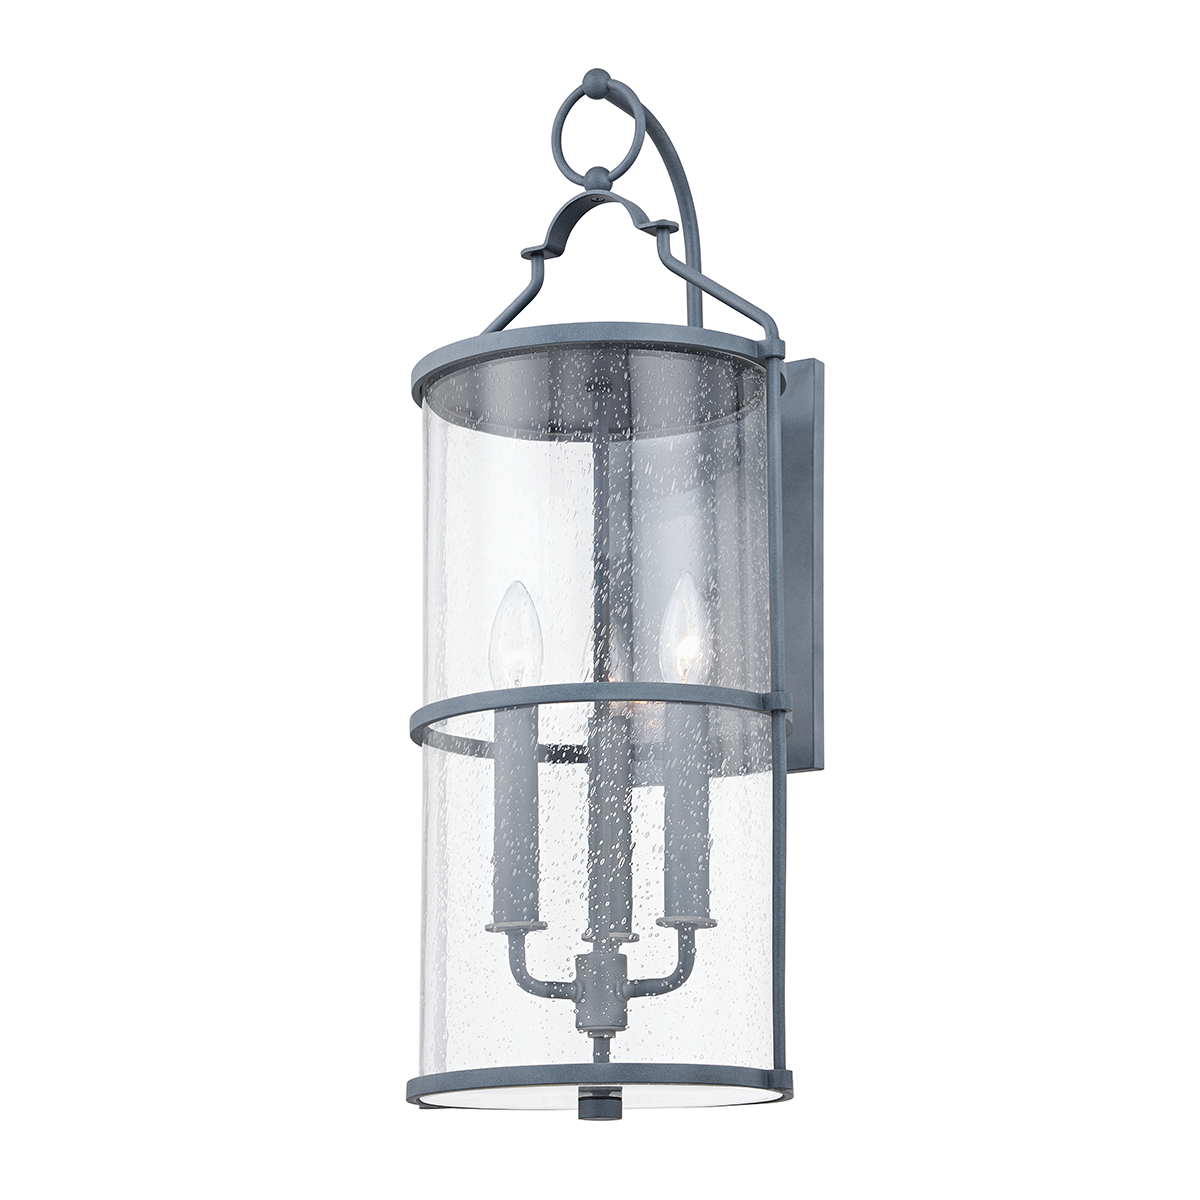 Troy Lighting 3 LIGHT LARGE EXTERIOR WALL SCONCE B1313 Outdoor l Wall Troy Lighting WEATHERED ZINC  